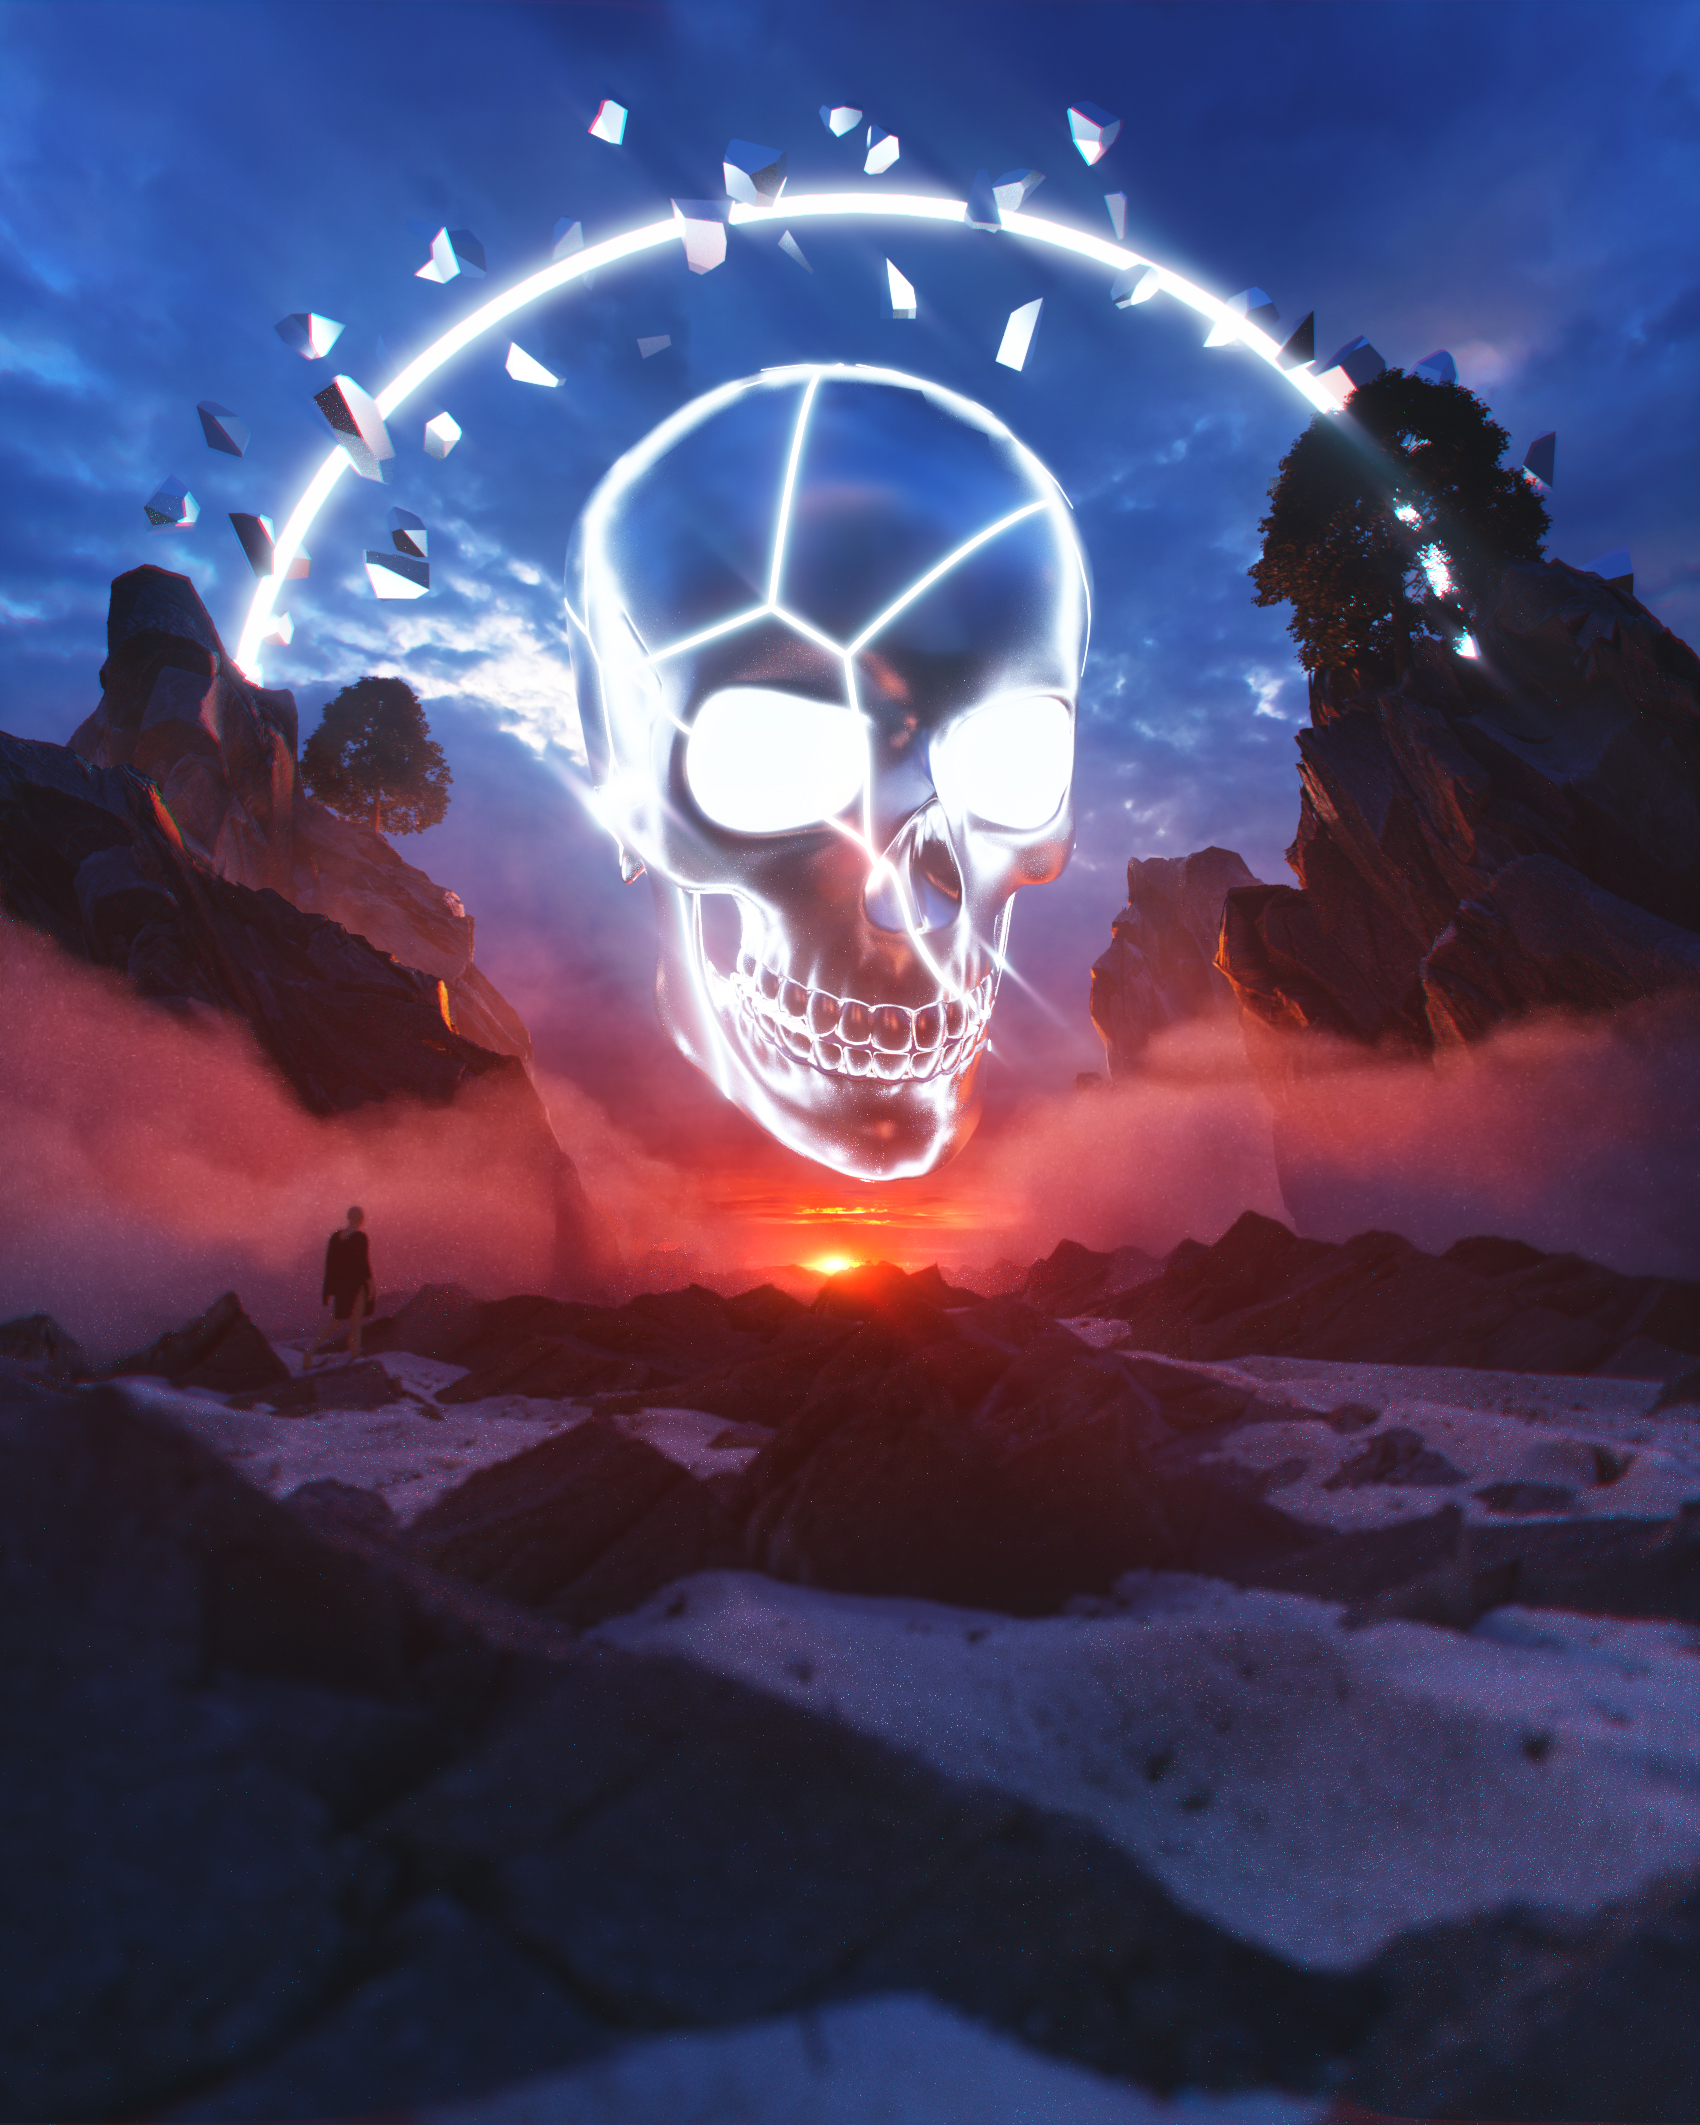 Digital poster of rocky barren landscape, dramatic sunset lighting and cool blues, dark silhouetted trees and large rocks in the background. A figure walks alone on the left, further back from the foreground. In the center a large white skull outline with a white arch and white fragments looms over the setting sun.